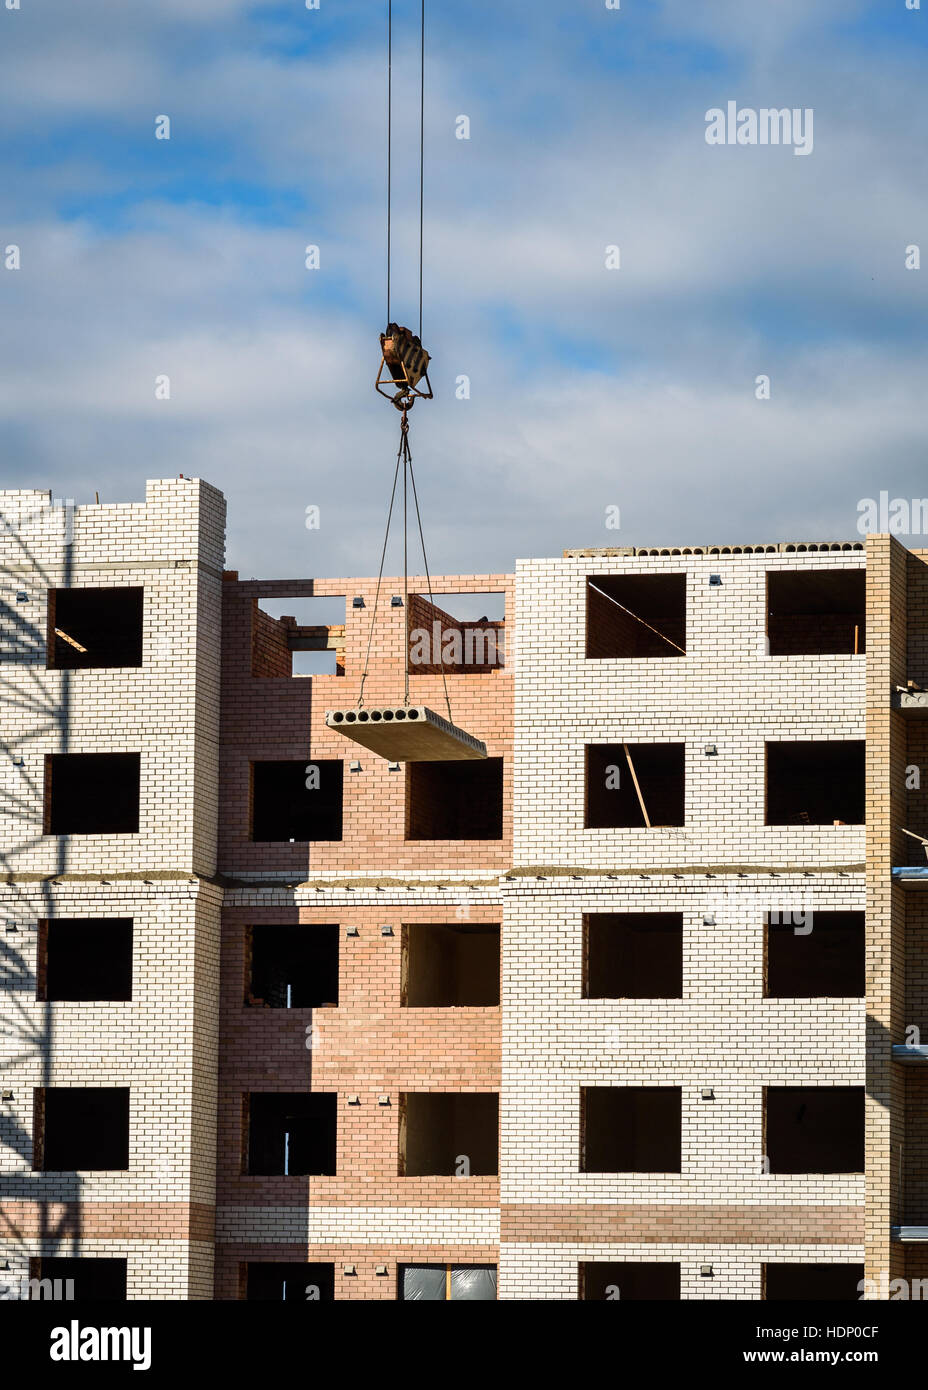 Crane lifting cement block on the background of building under construction Stock Photo